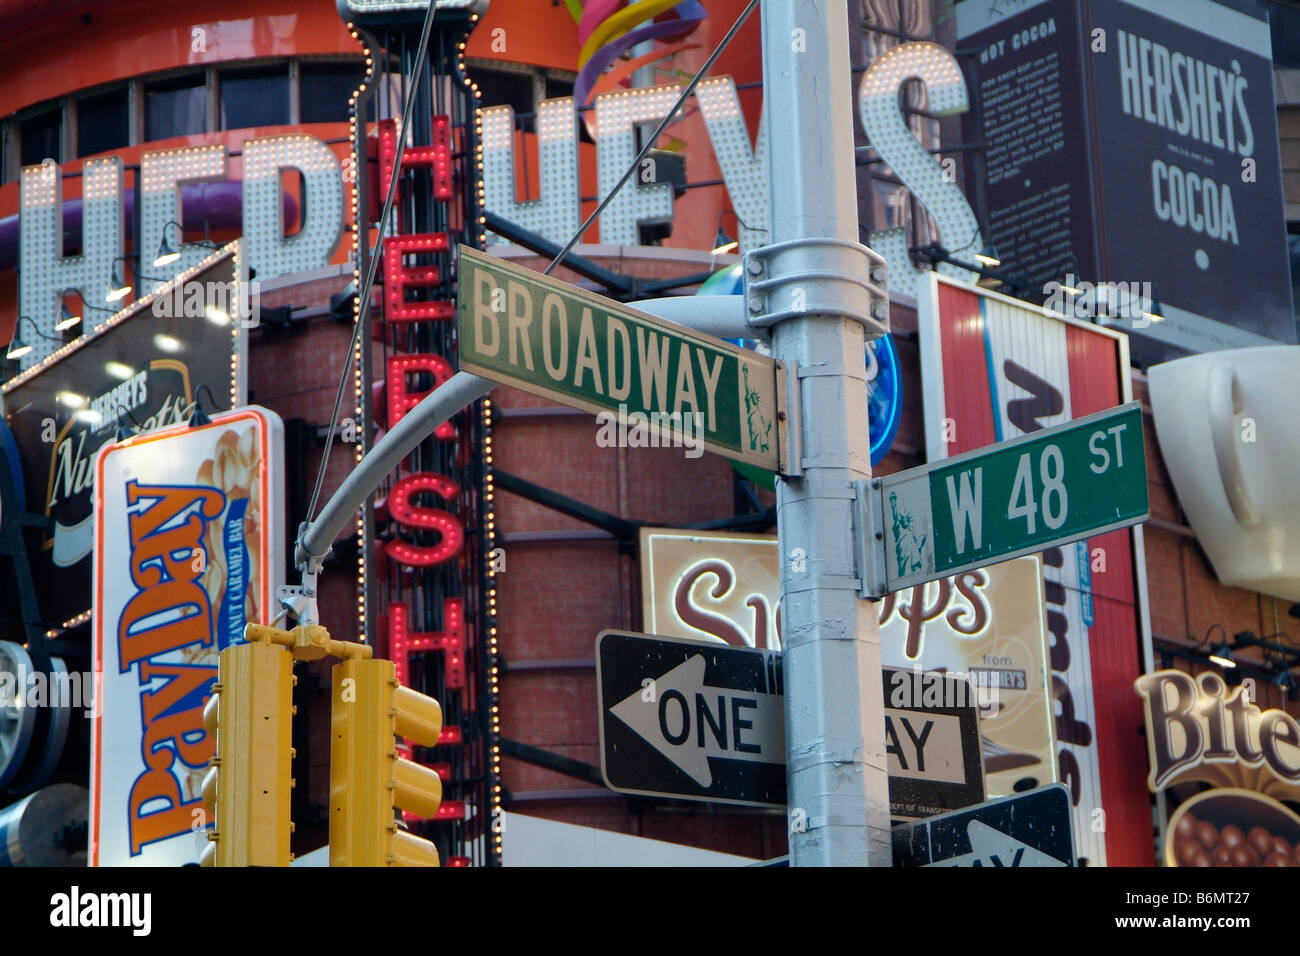 Street signs and advertising displays in Times Square, New York Stock Photo